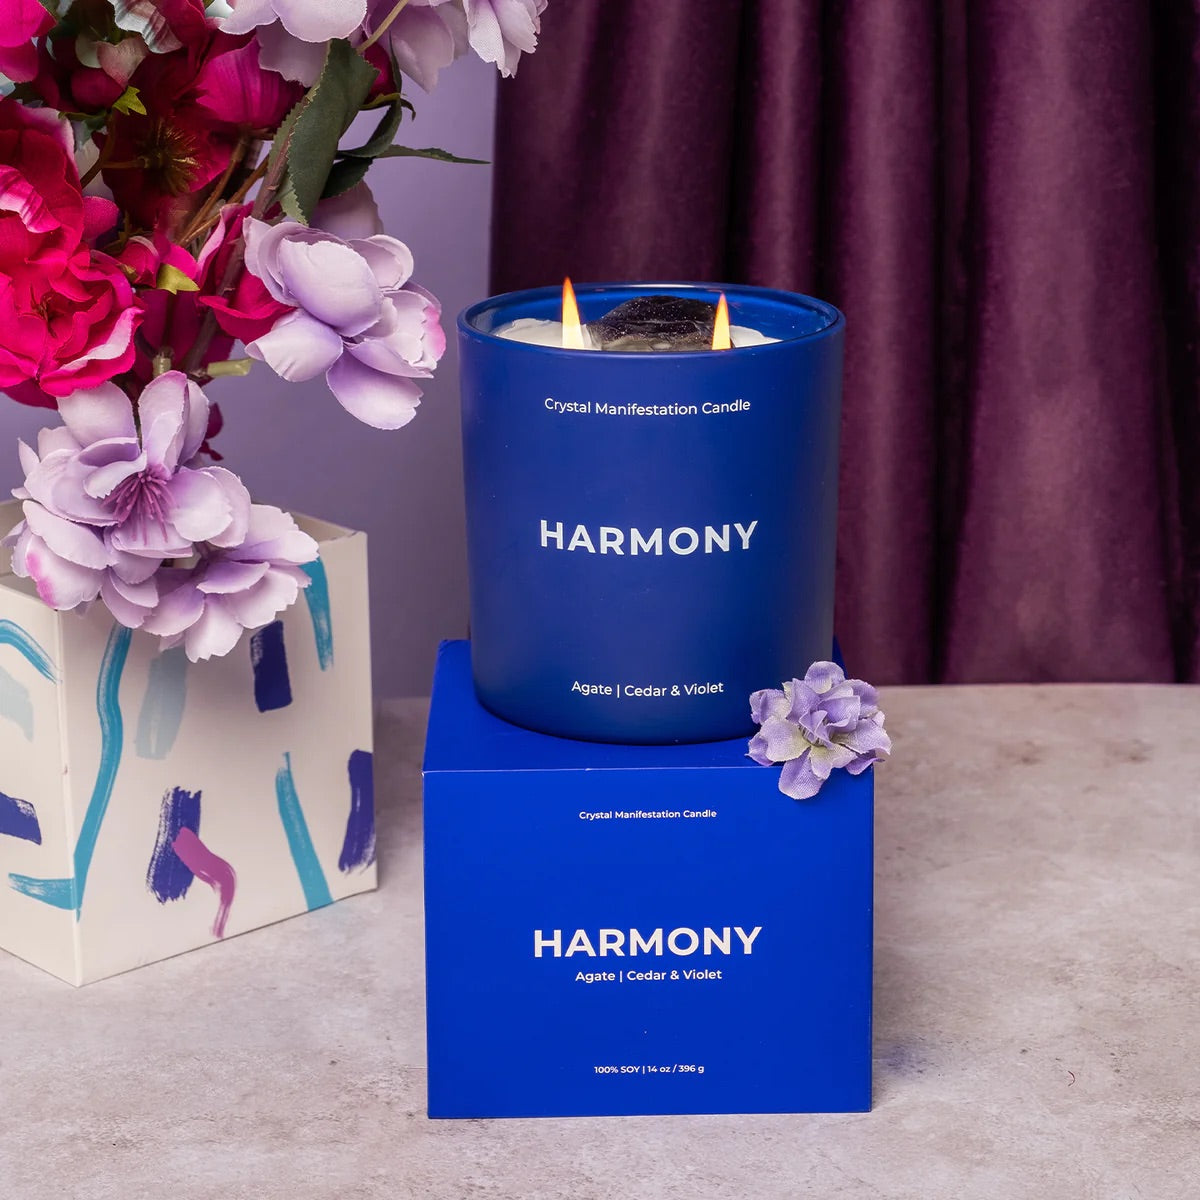 Harmony Crystal Manifestation Candle - Cedar & Violet Scented with Agate